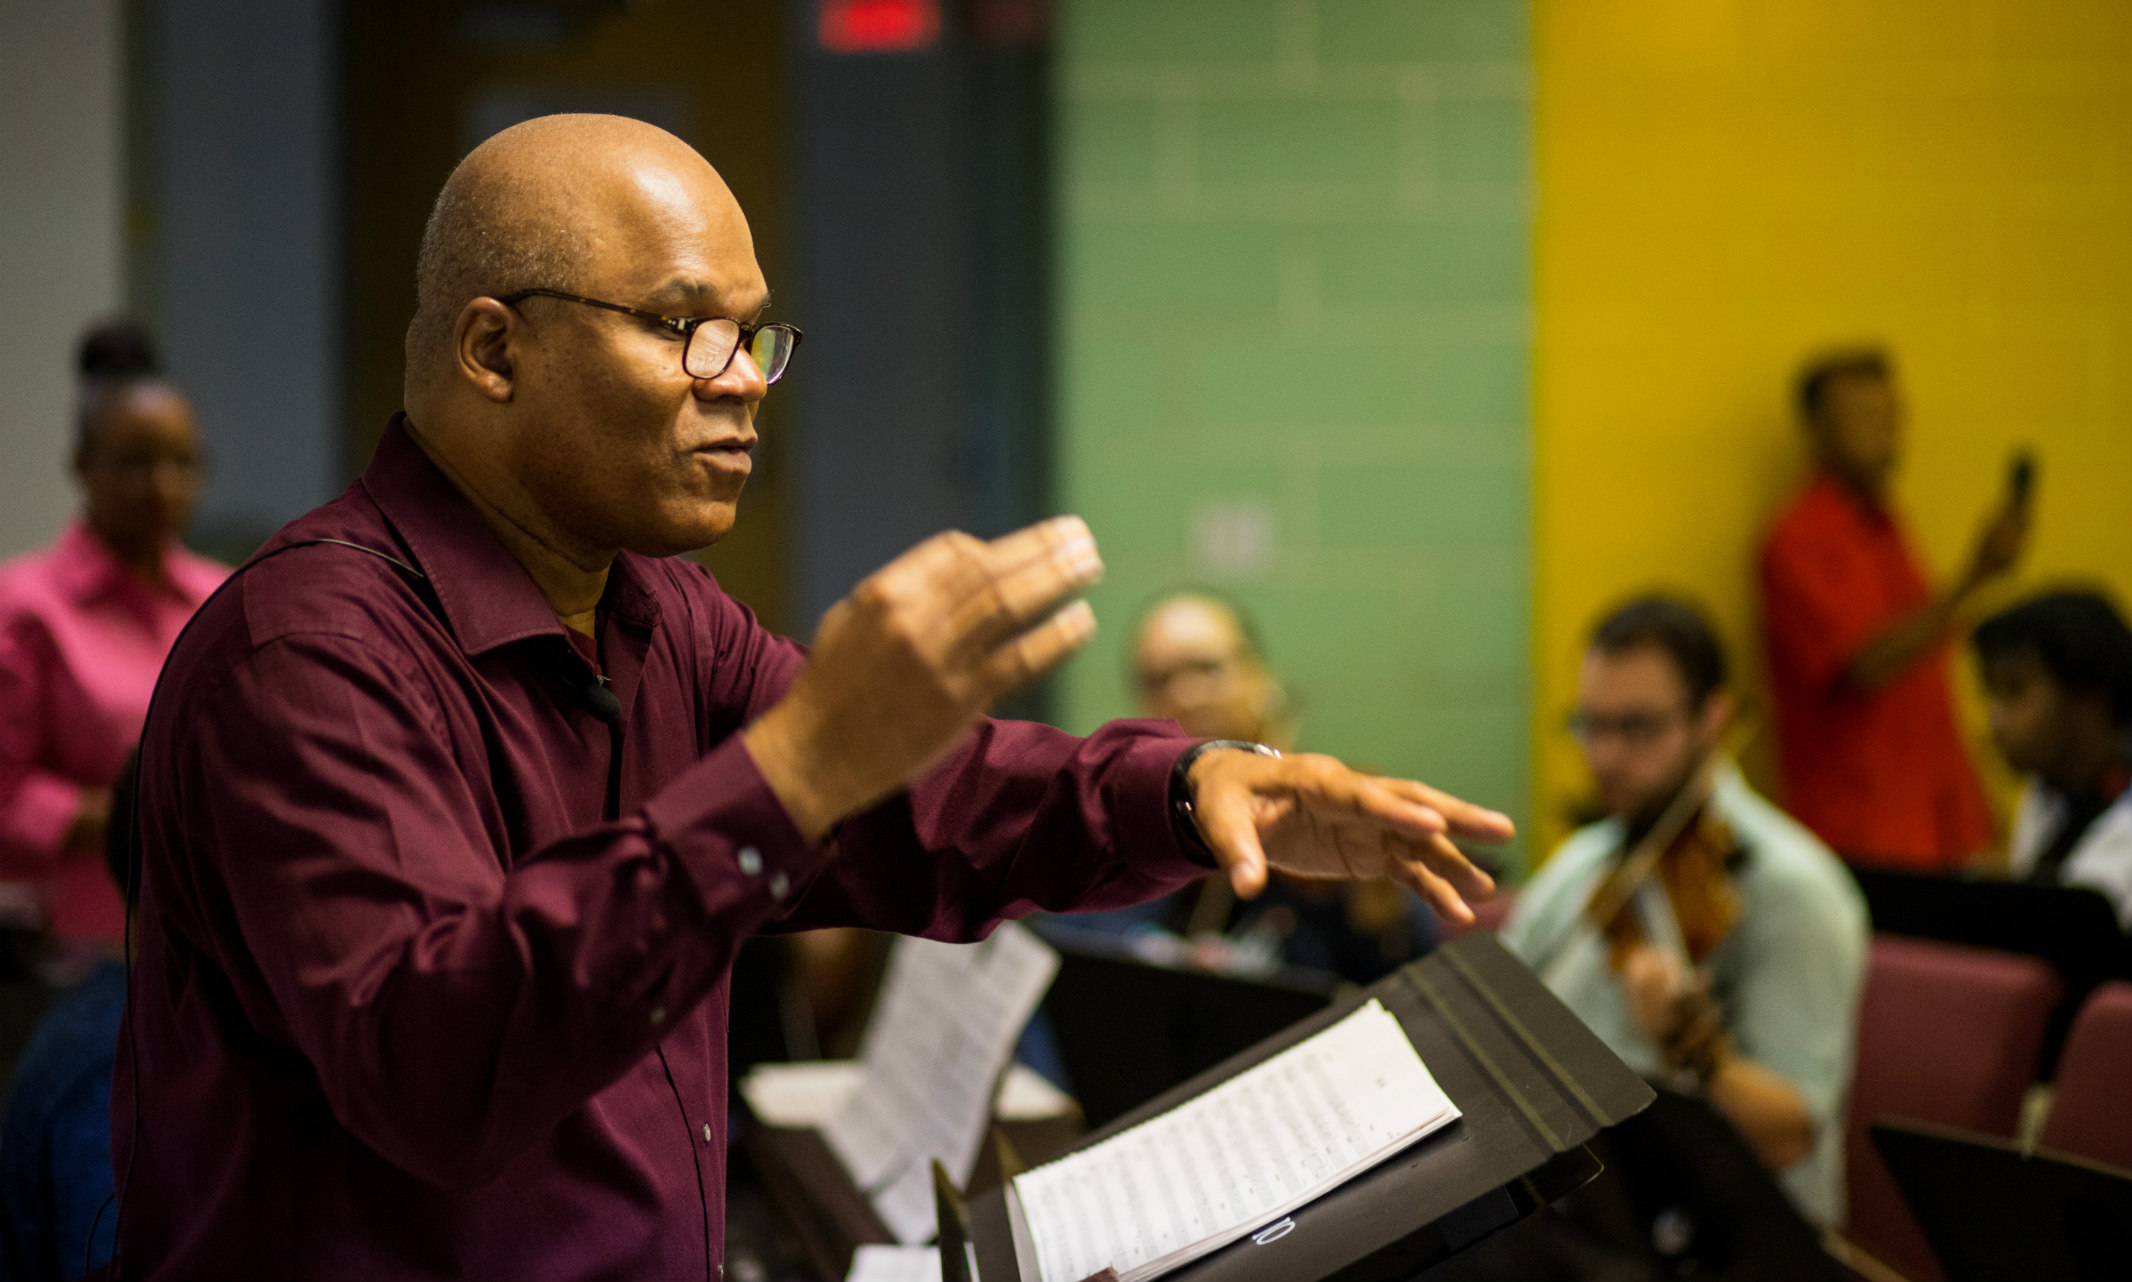 Darryl Chamberlain conducting a group of student musicians